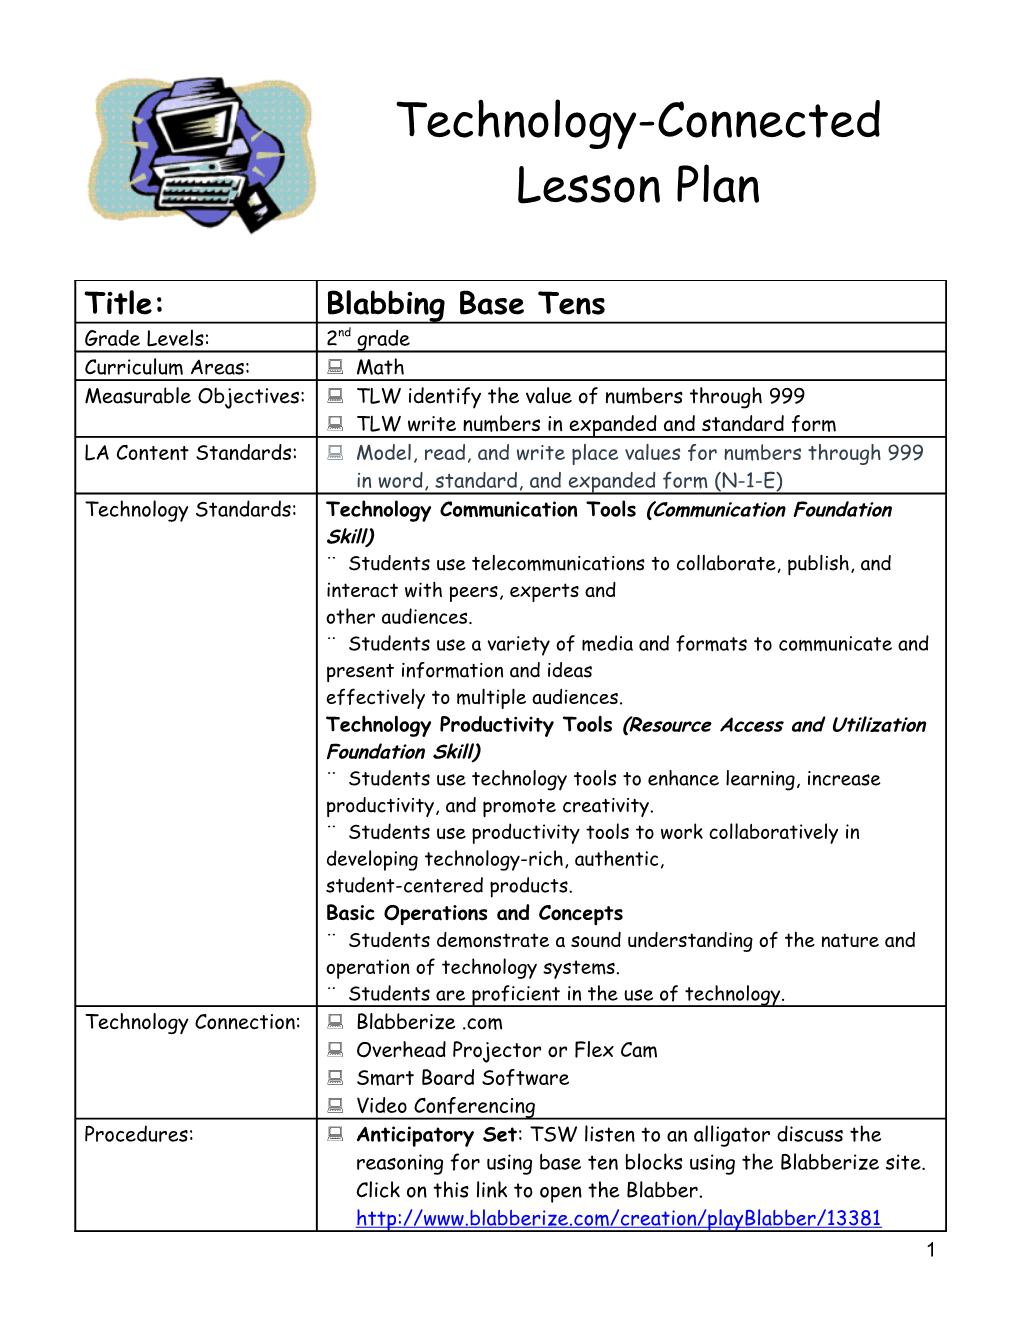 Technology-Connected Lesson Plan s2